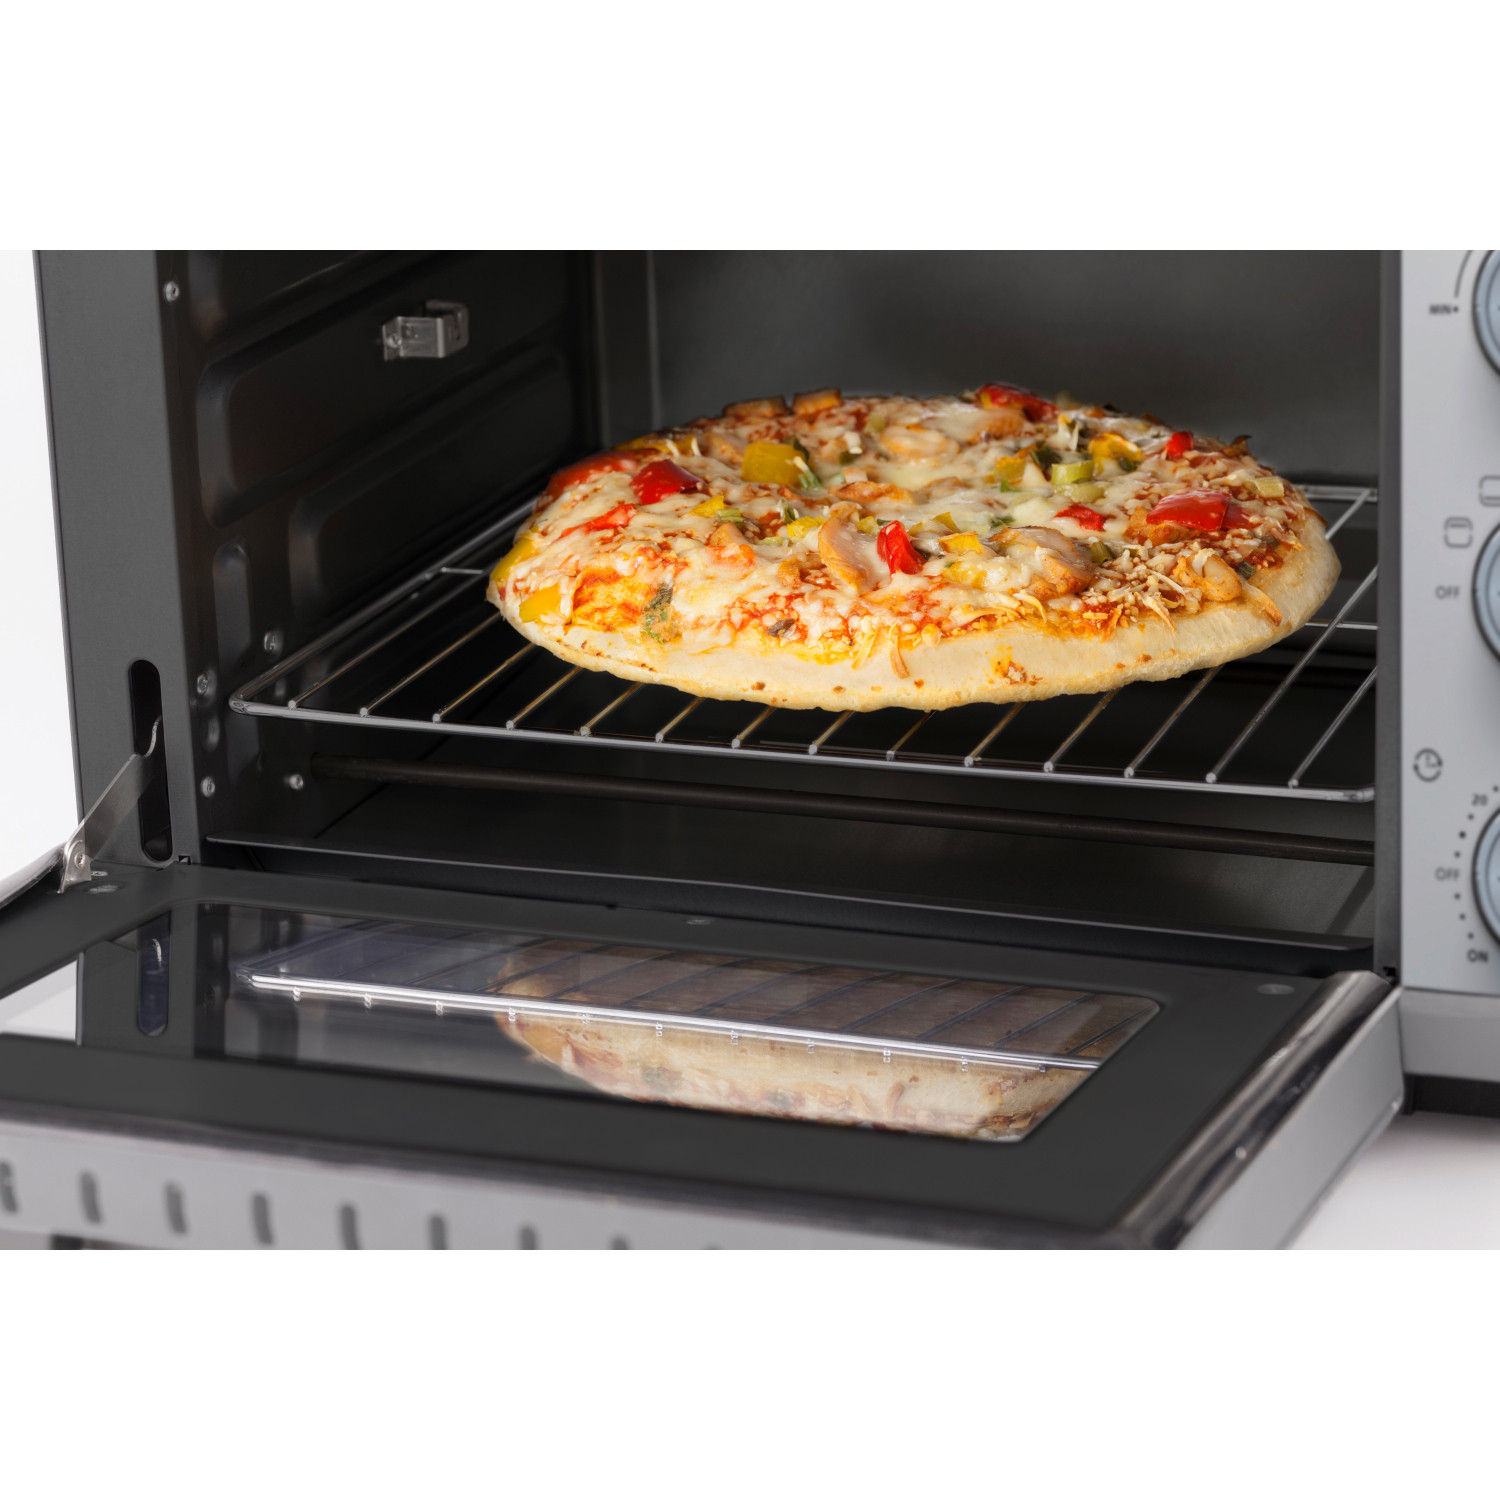 CASO 20 TO Mini-Backofen | SilverStyle electronic4you